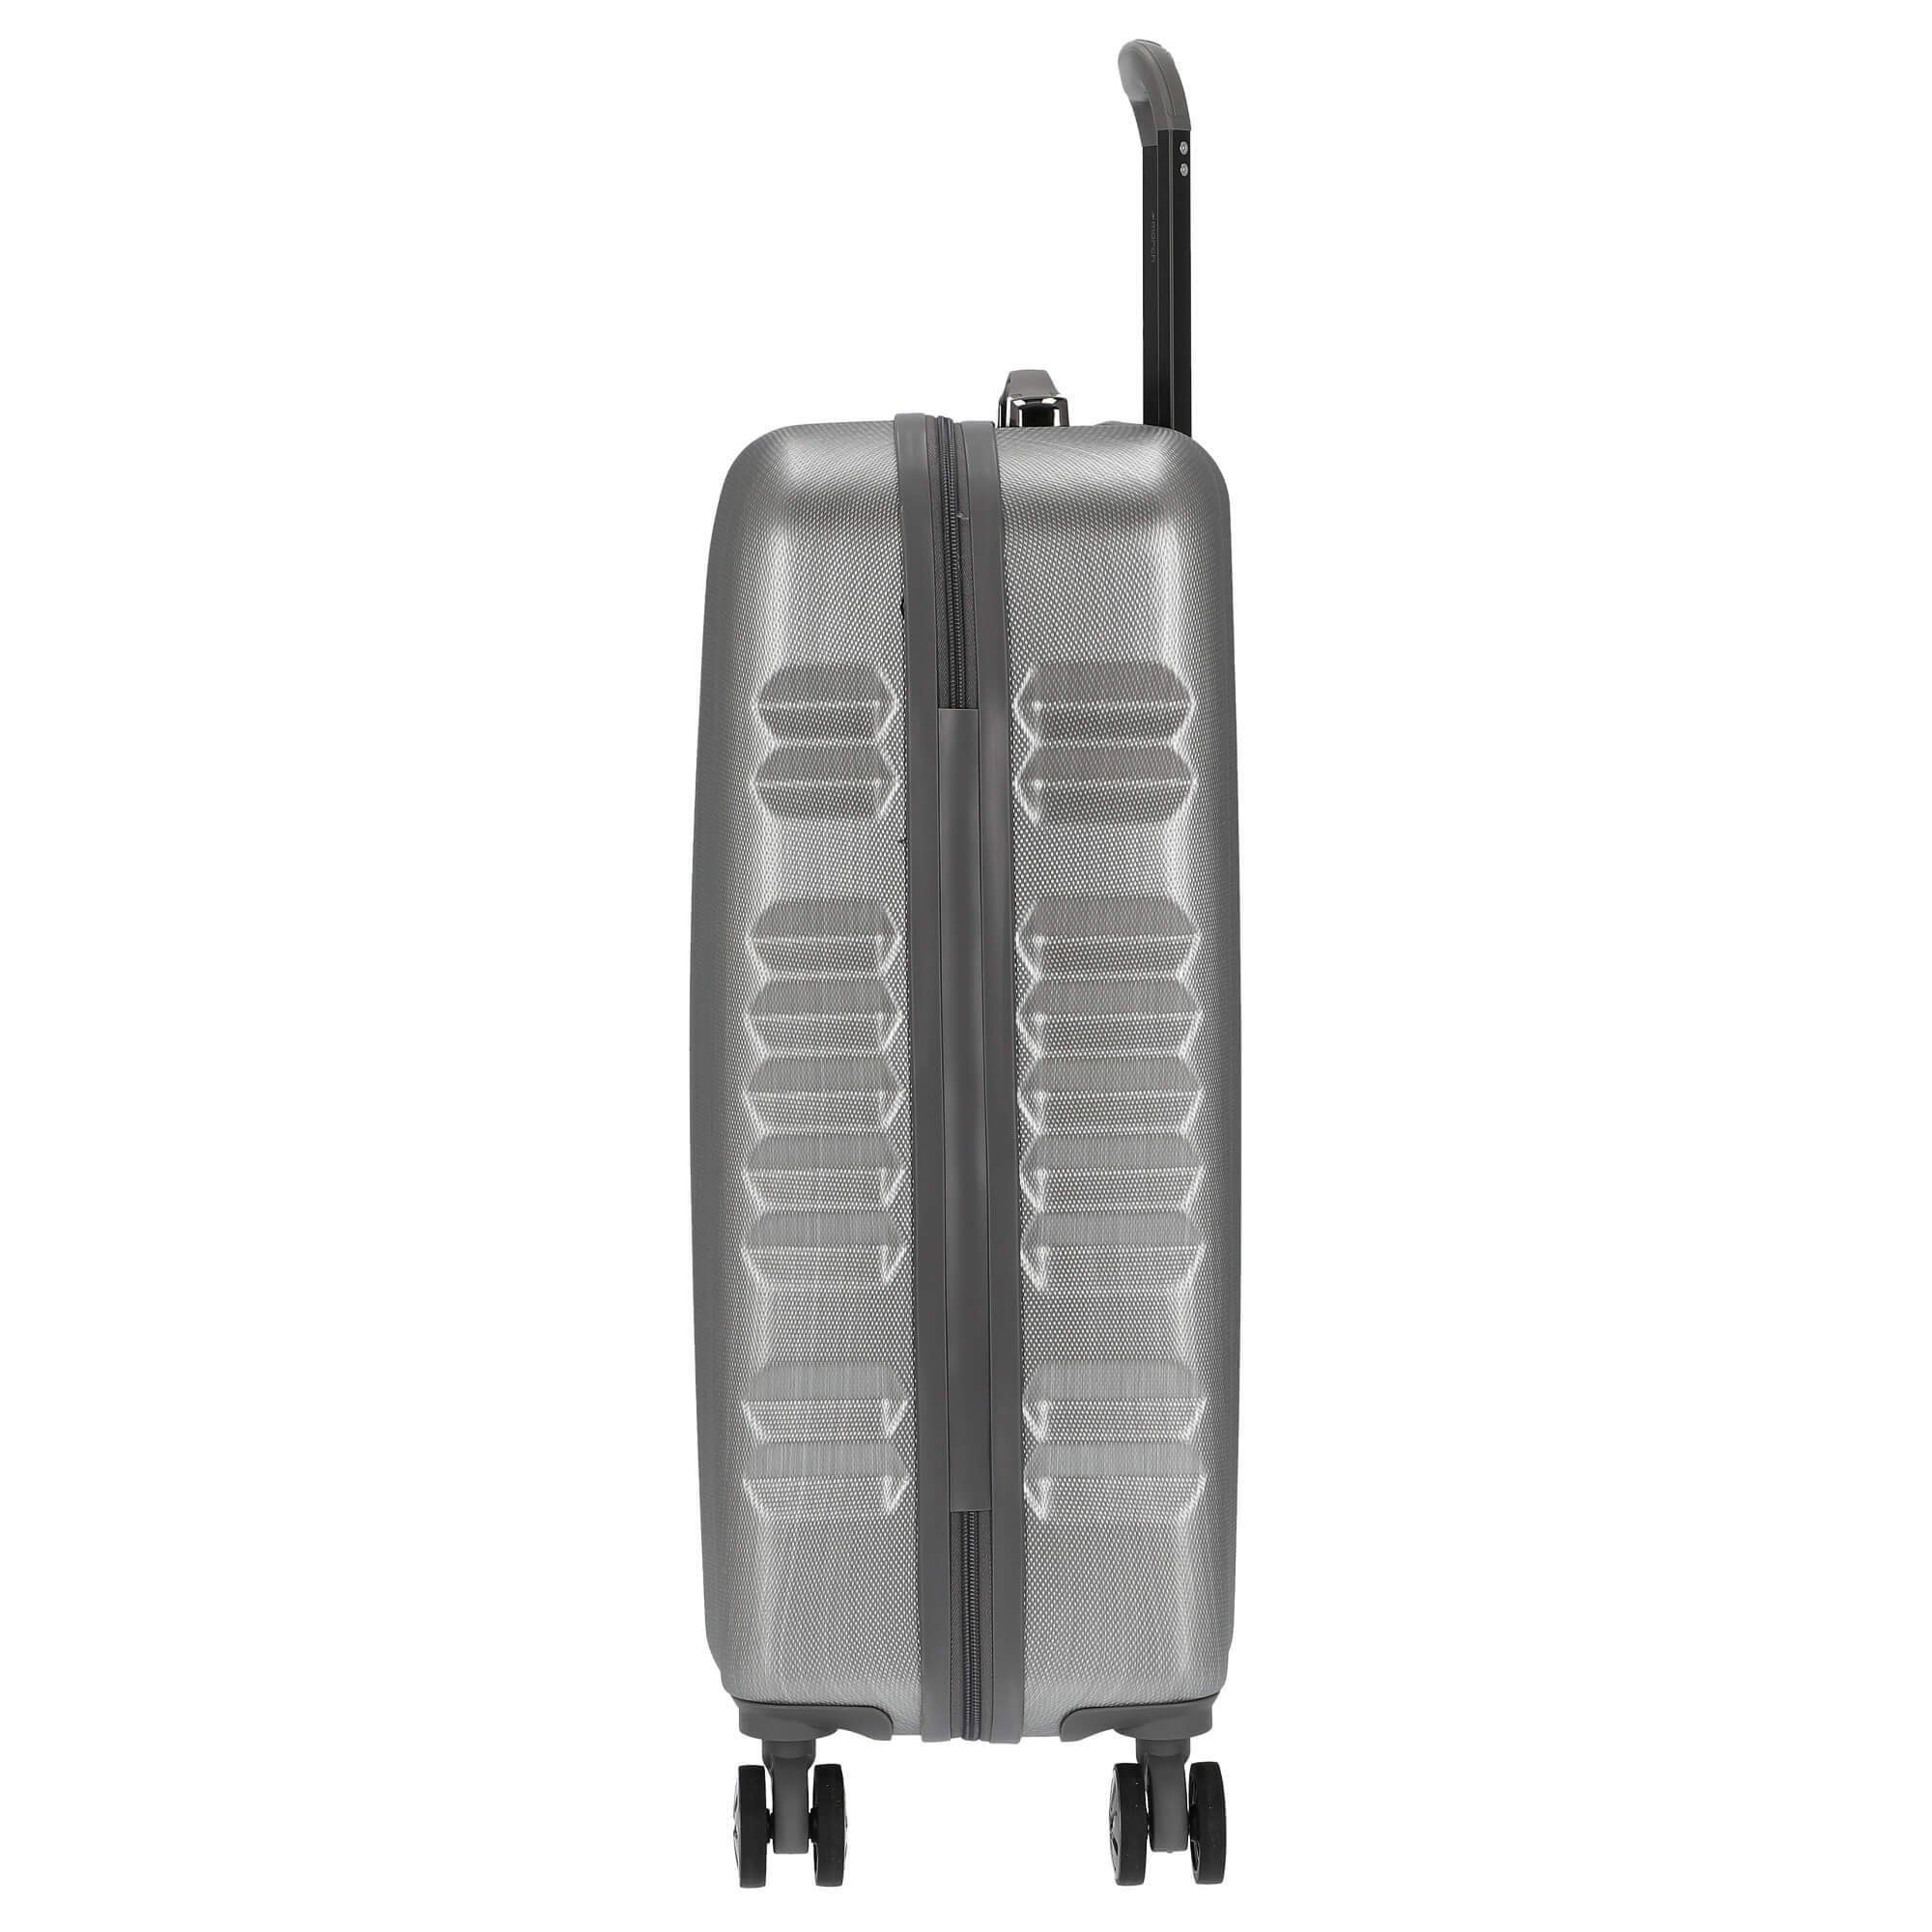 March15 Trading Trolley Fly brushed - silver Rollen 4 brushed M 4-Rollen-Trolley 65 cm